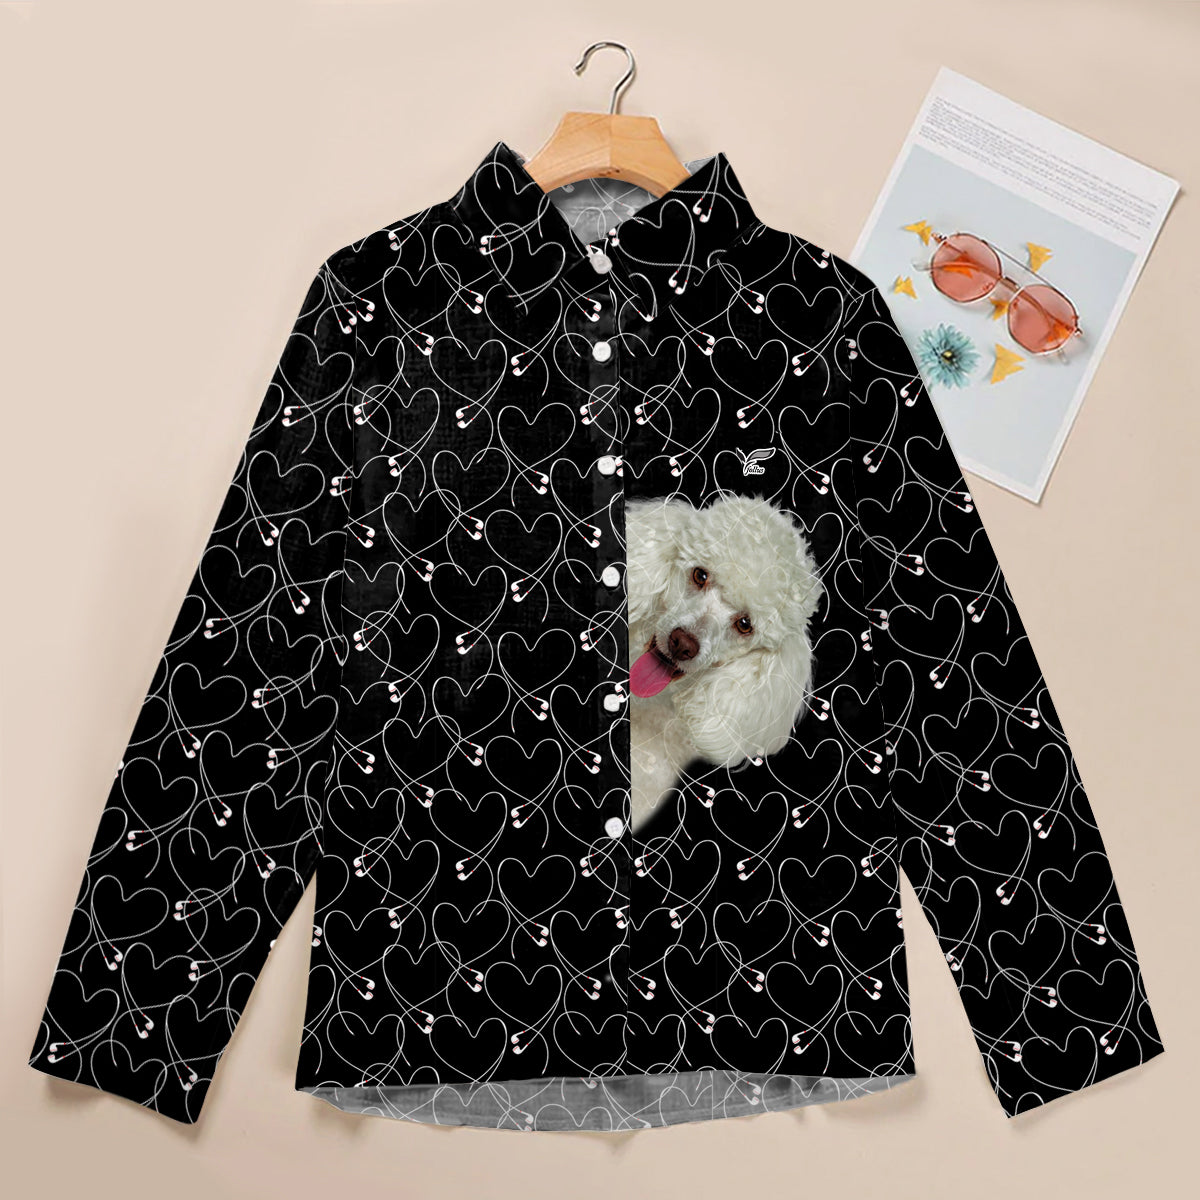 Poodle Will Steal Your Heart - Follus Women's Long-Sleeve Shirt